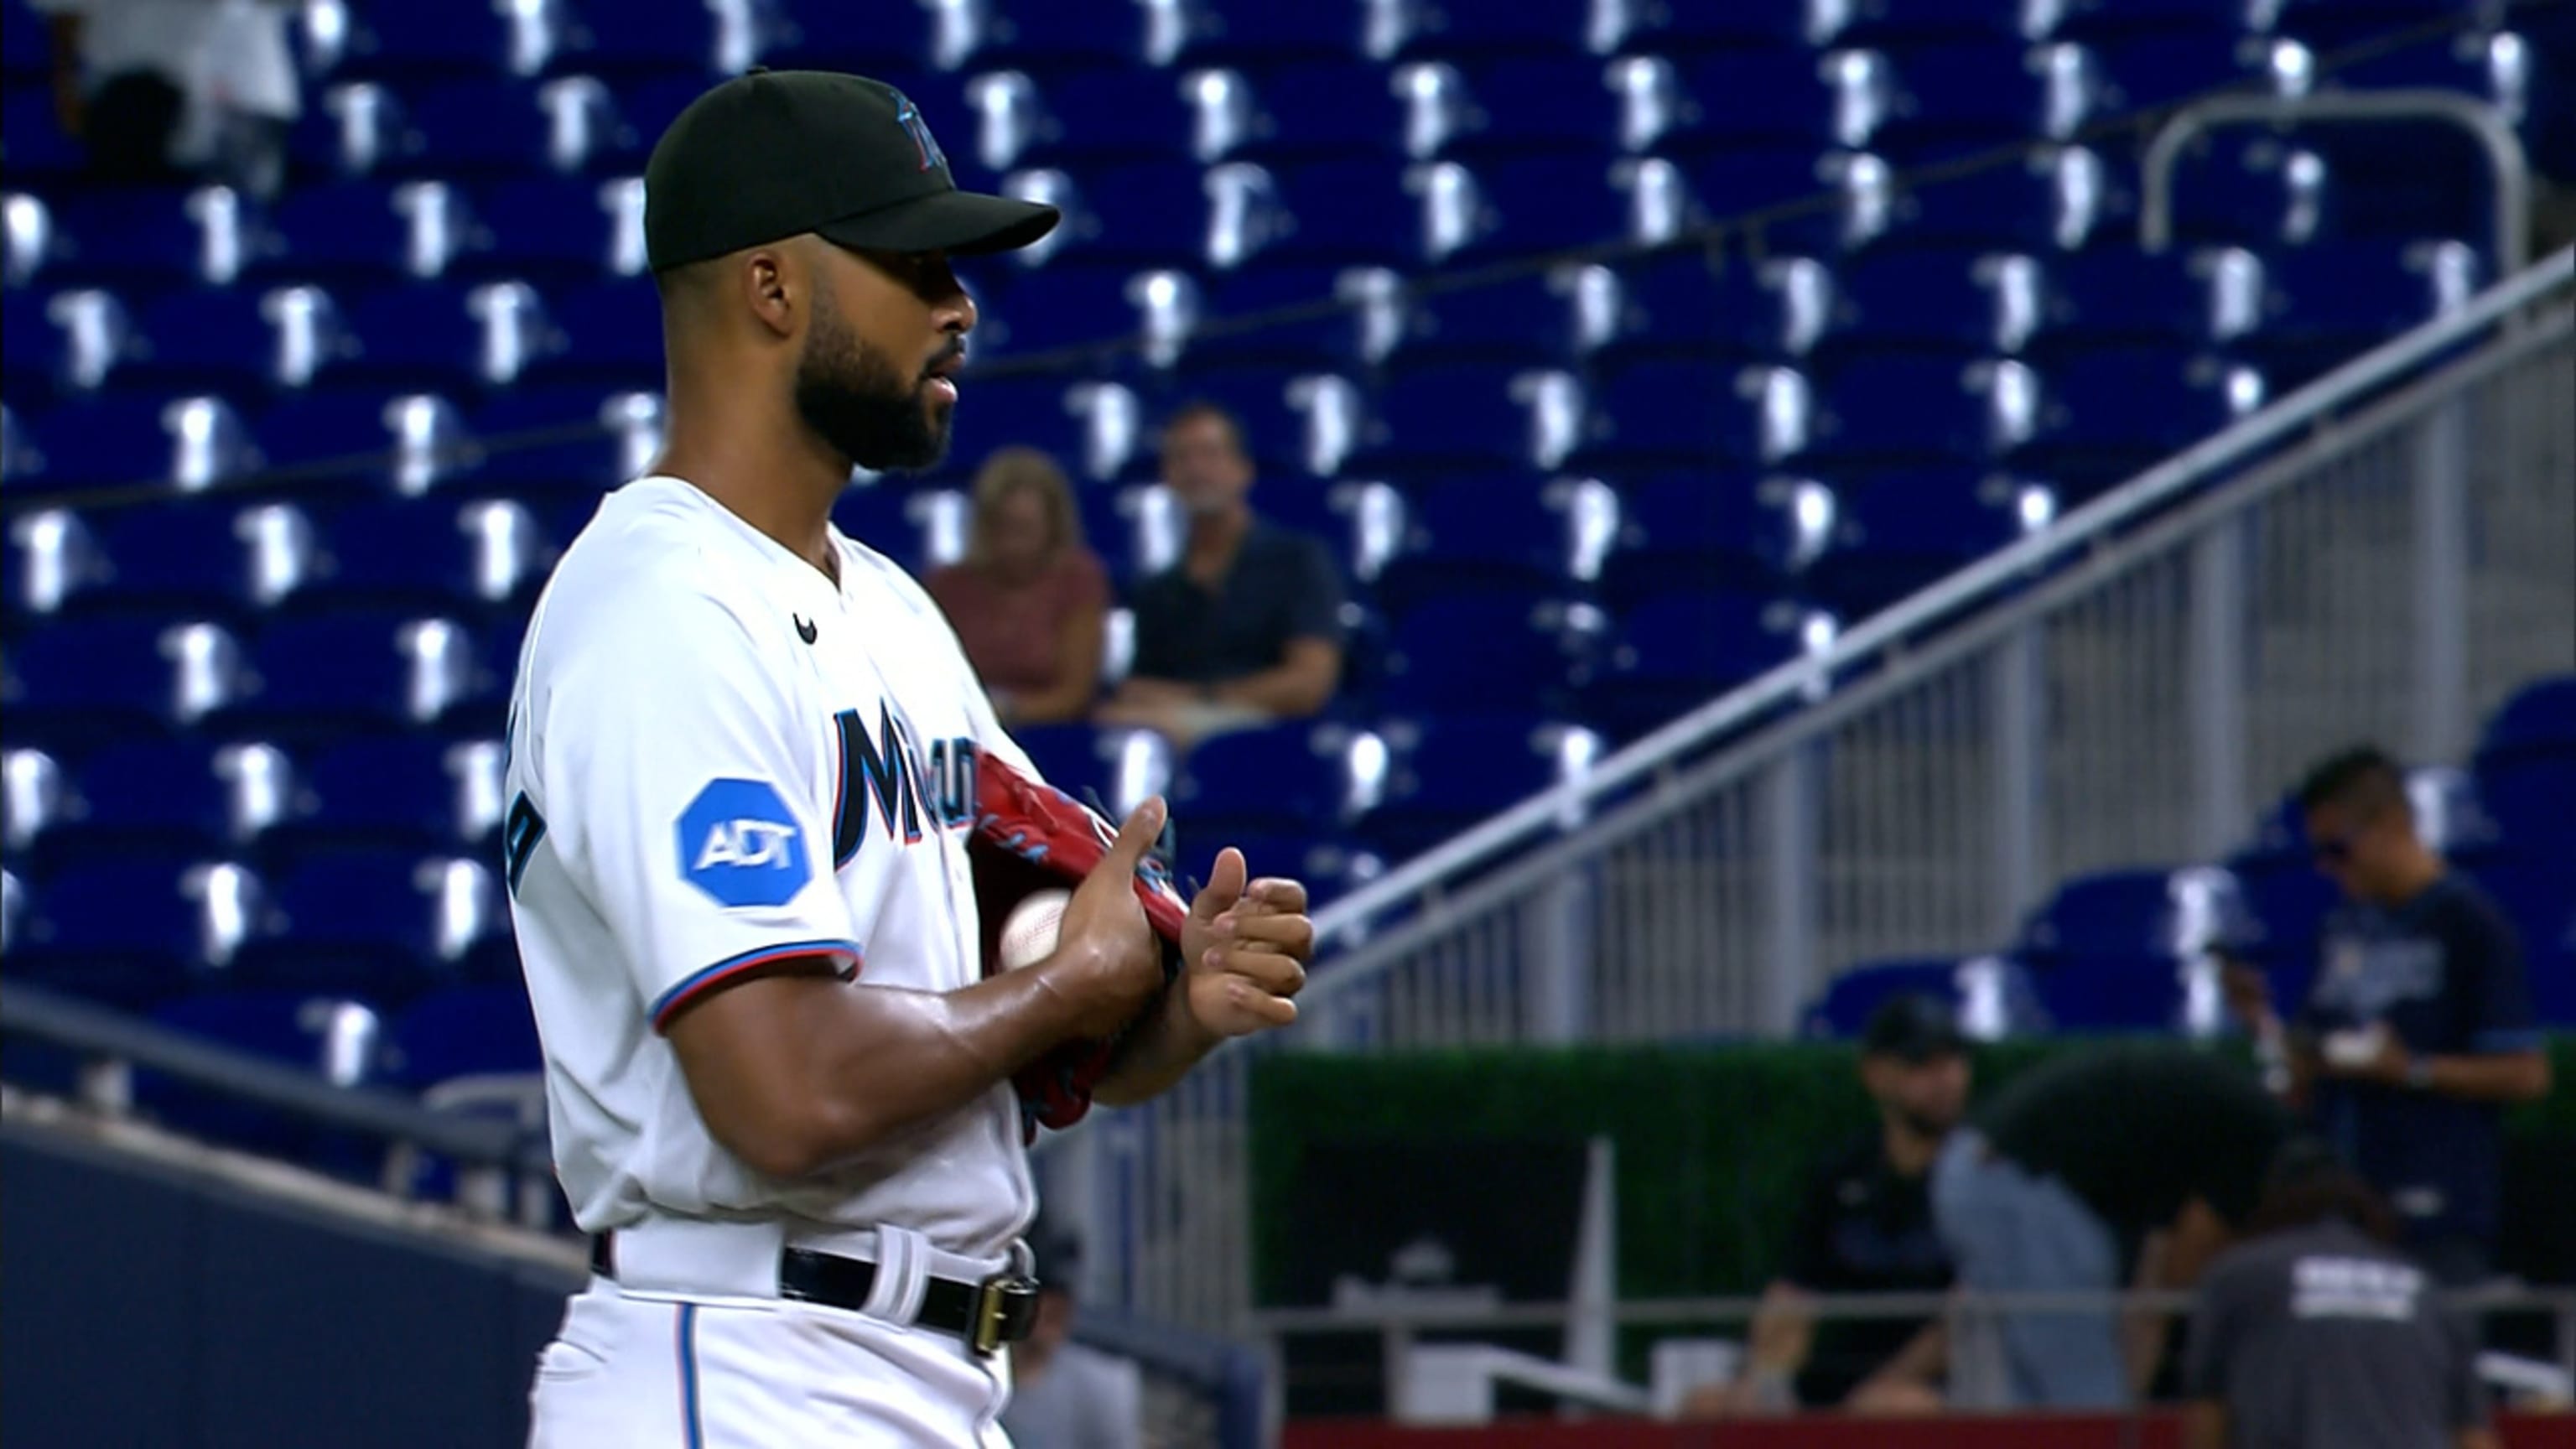 Meet the Miami Marlins' 2022 MLB Opening Day roster